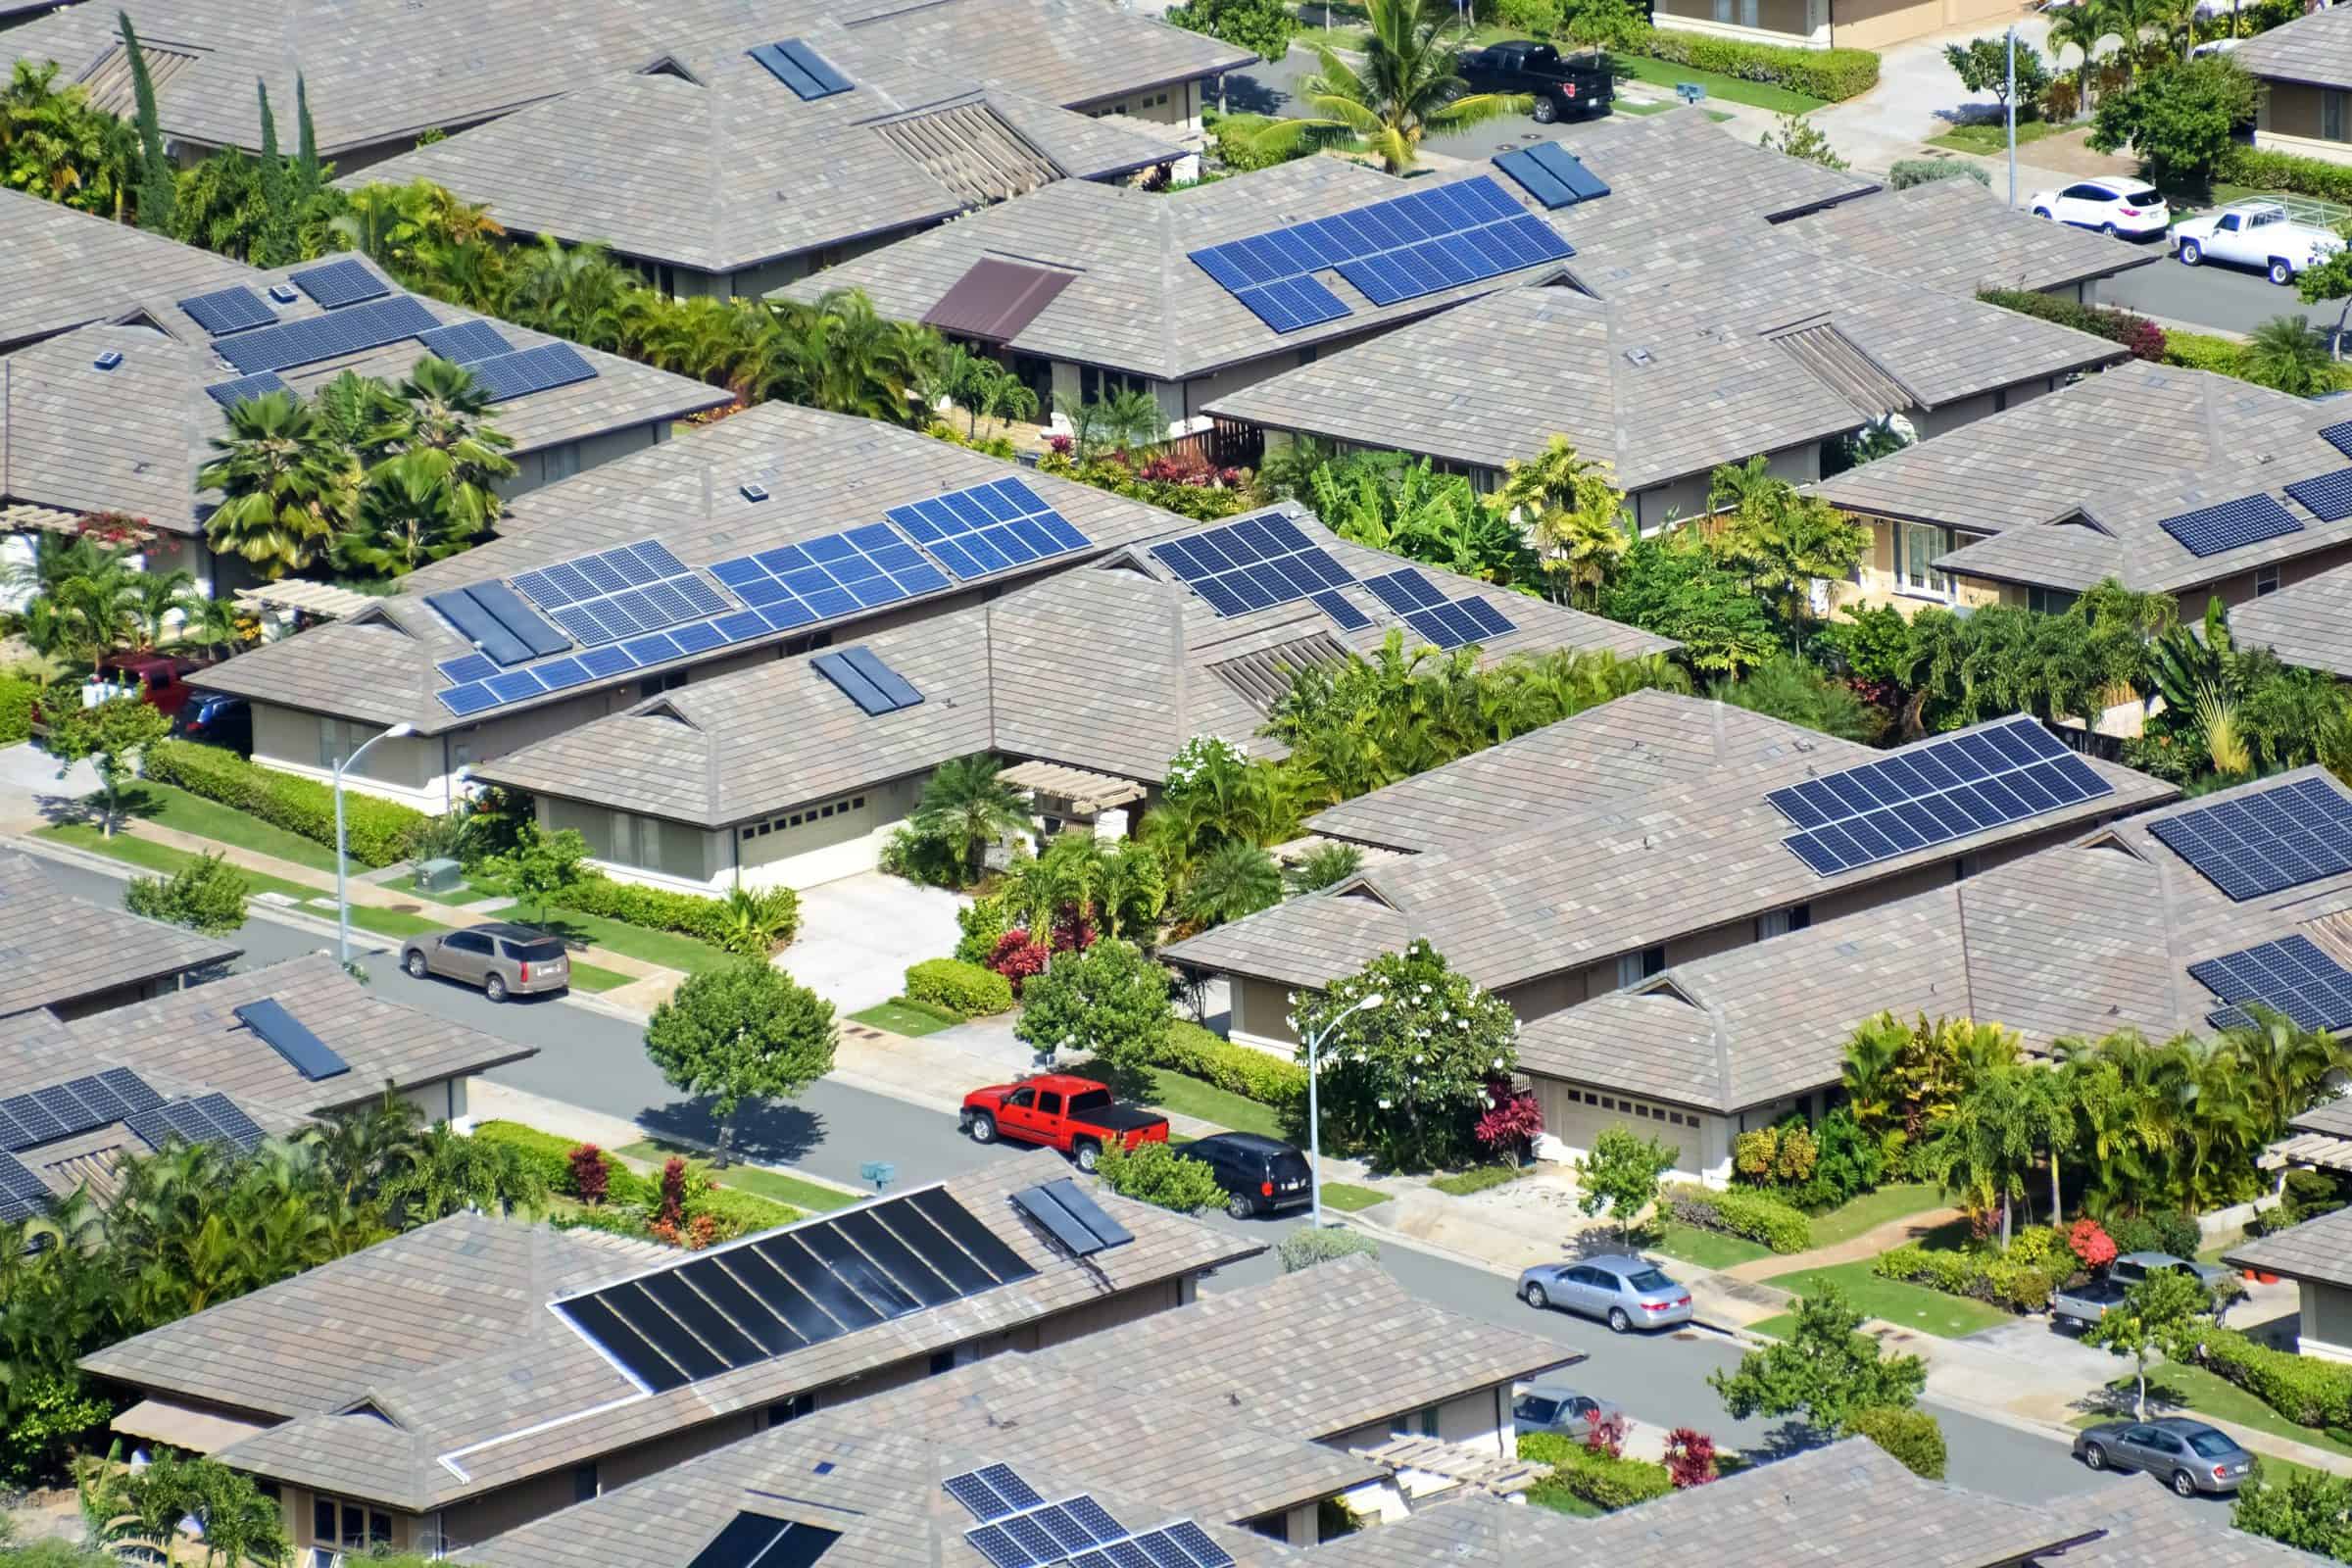 Bird's eye view of a neighborhood with solar panels on installed on various roofs.